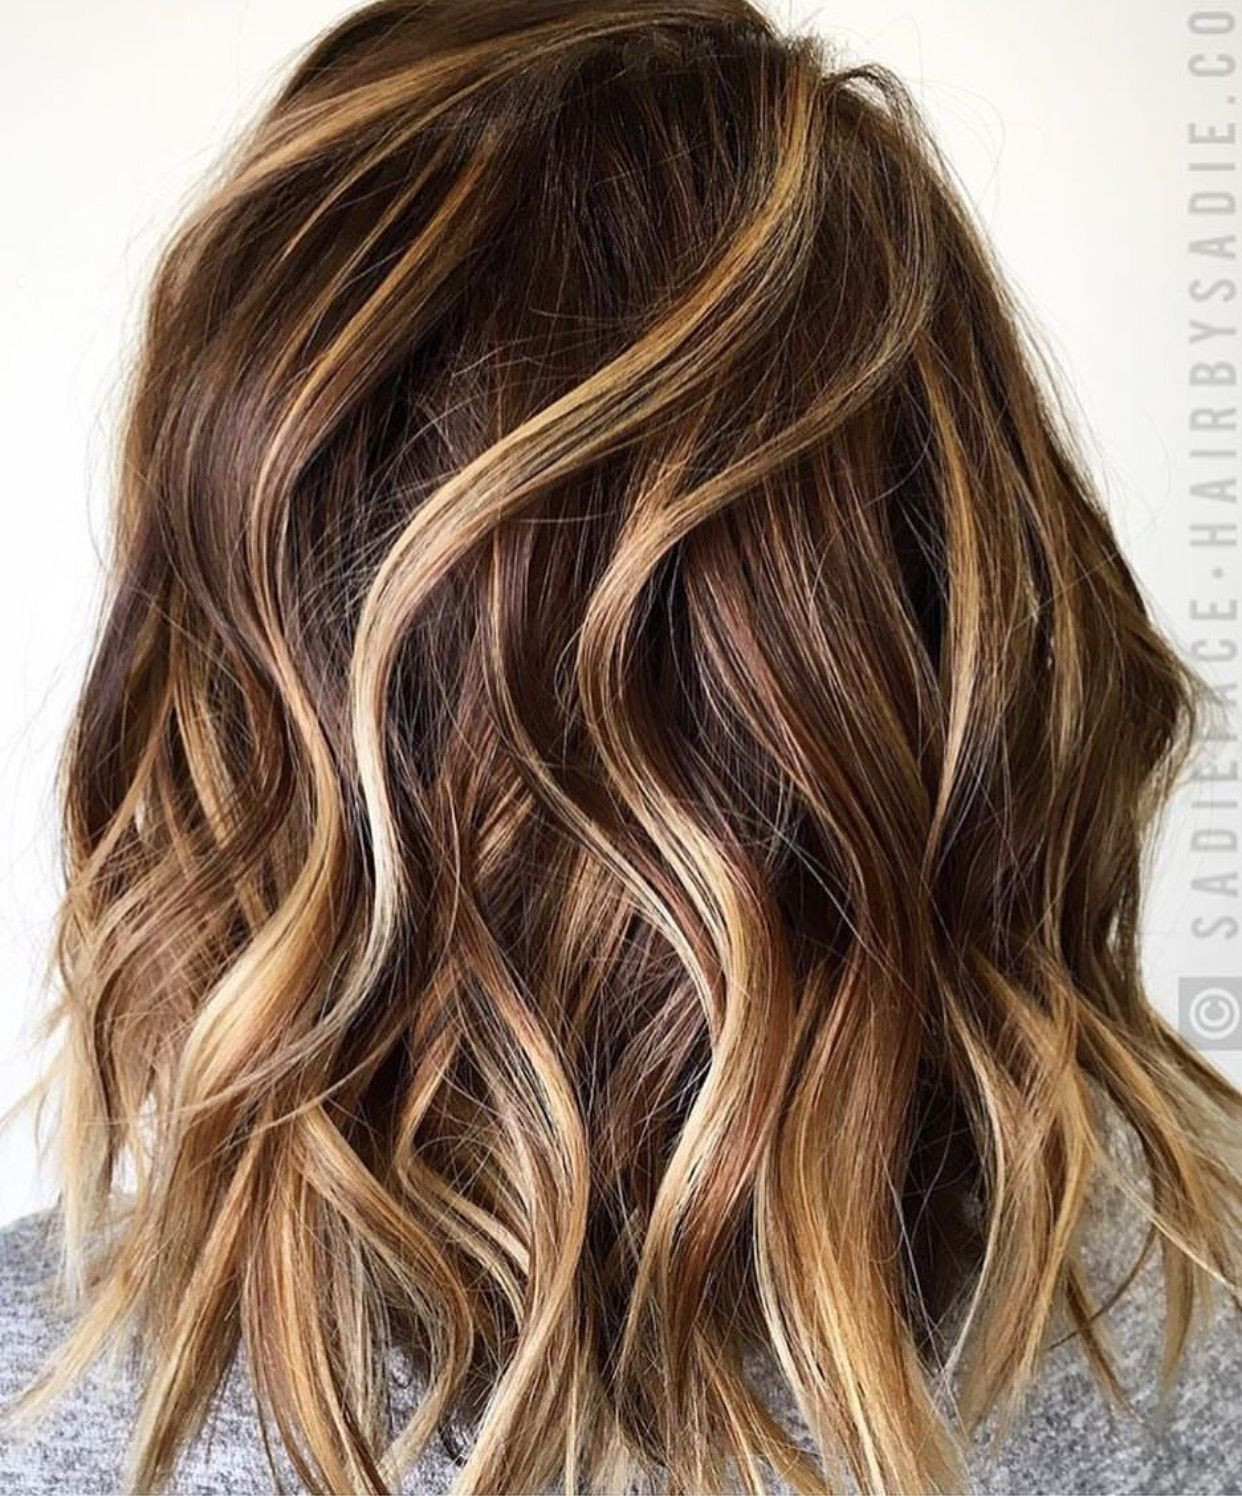 Summer Hair Color Ideas
 love this color